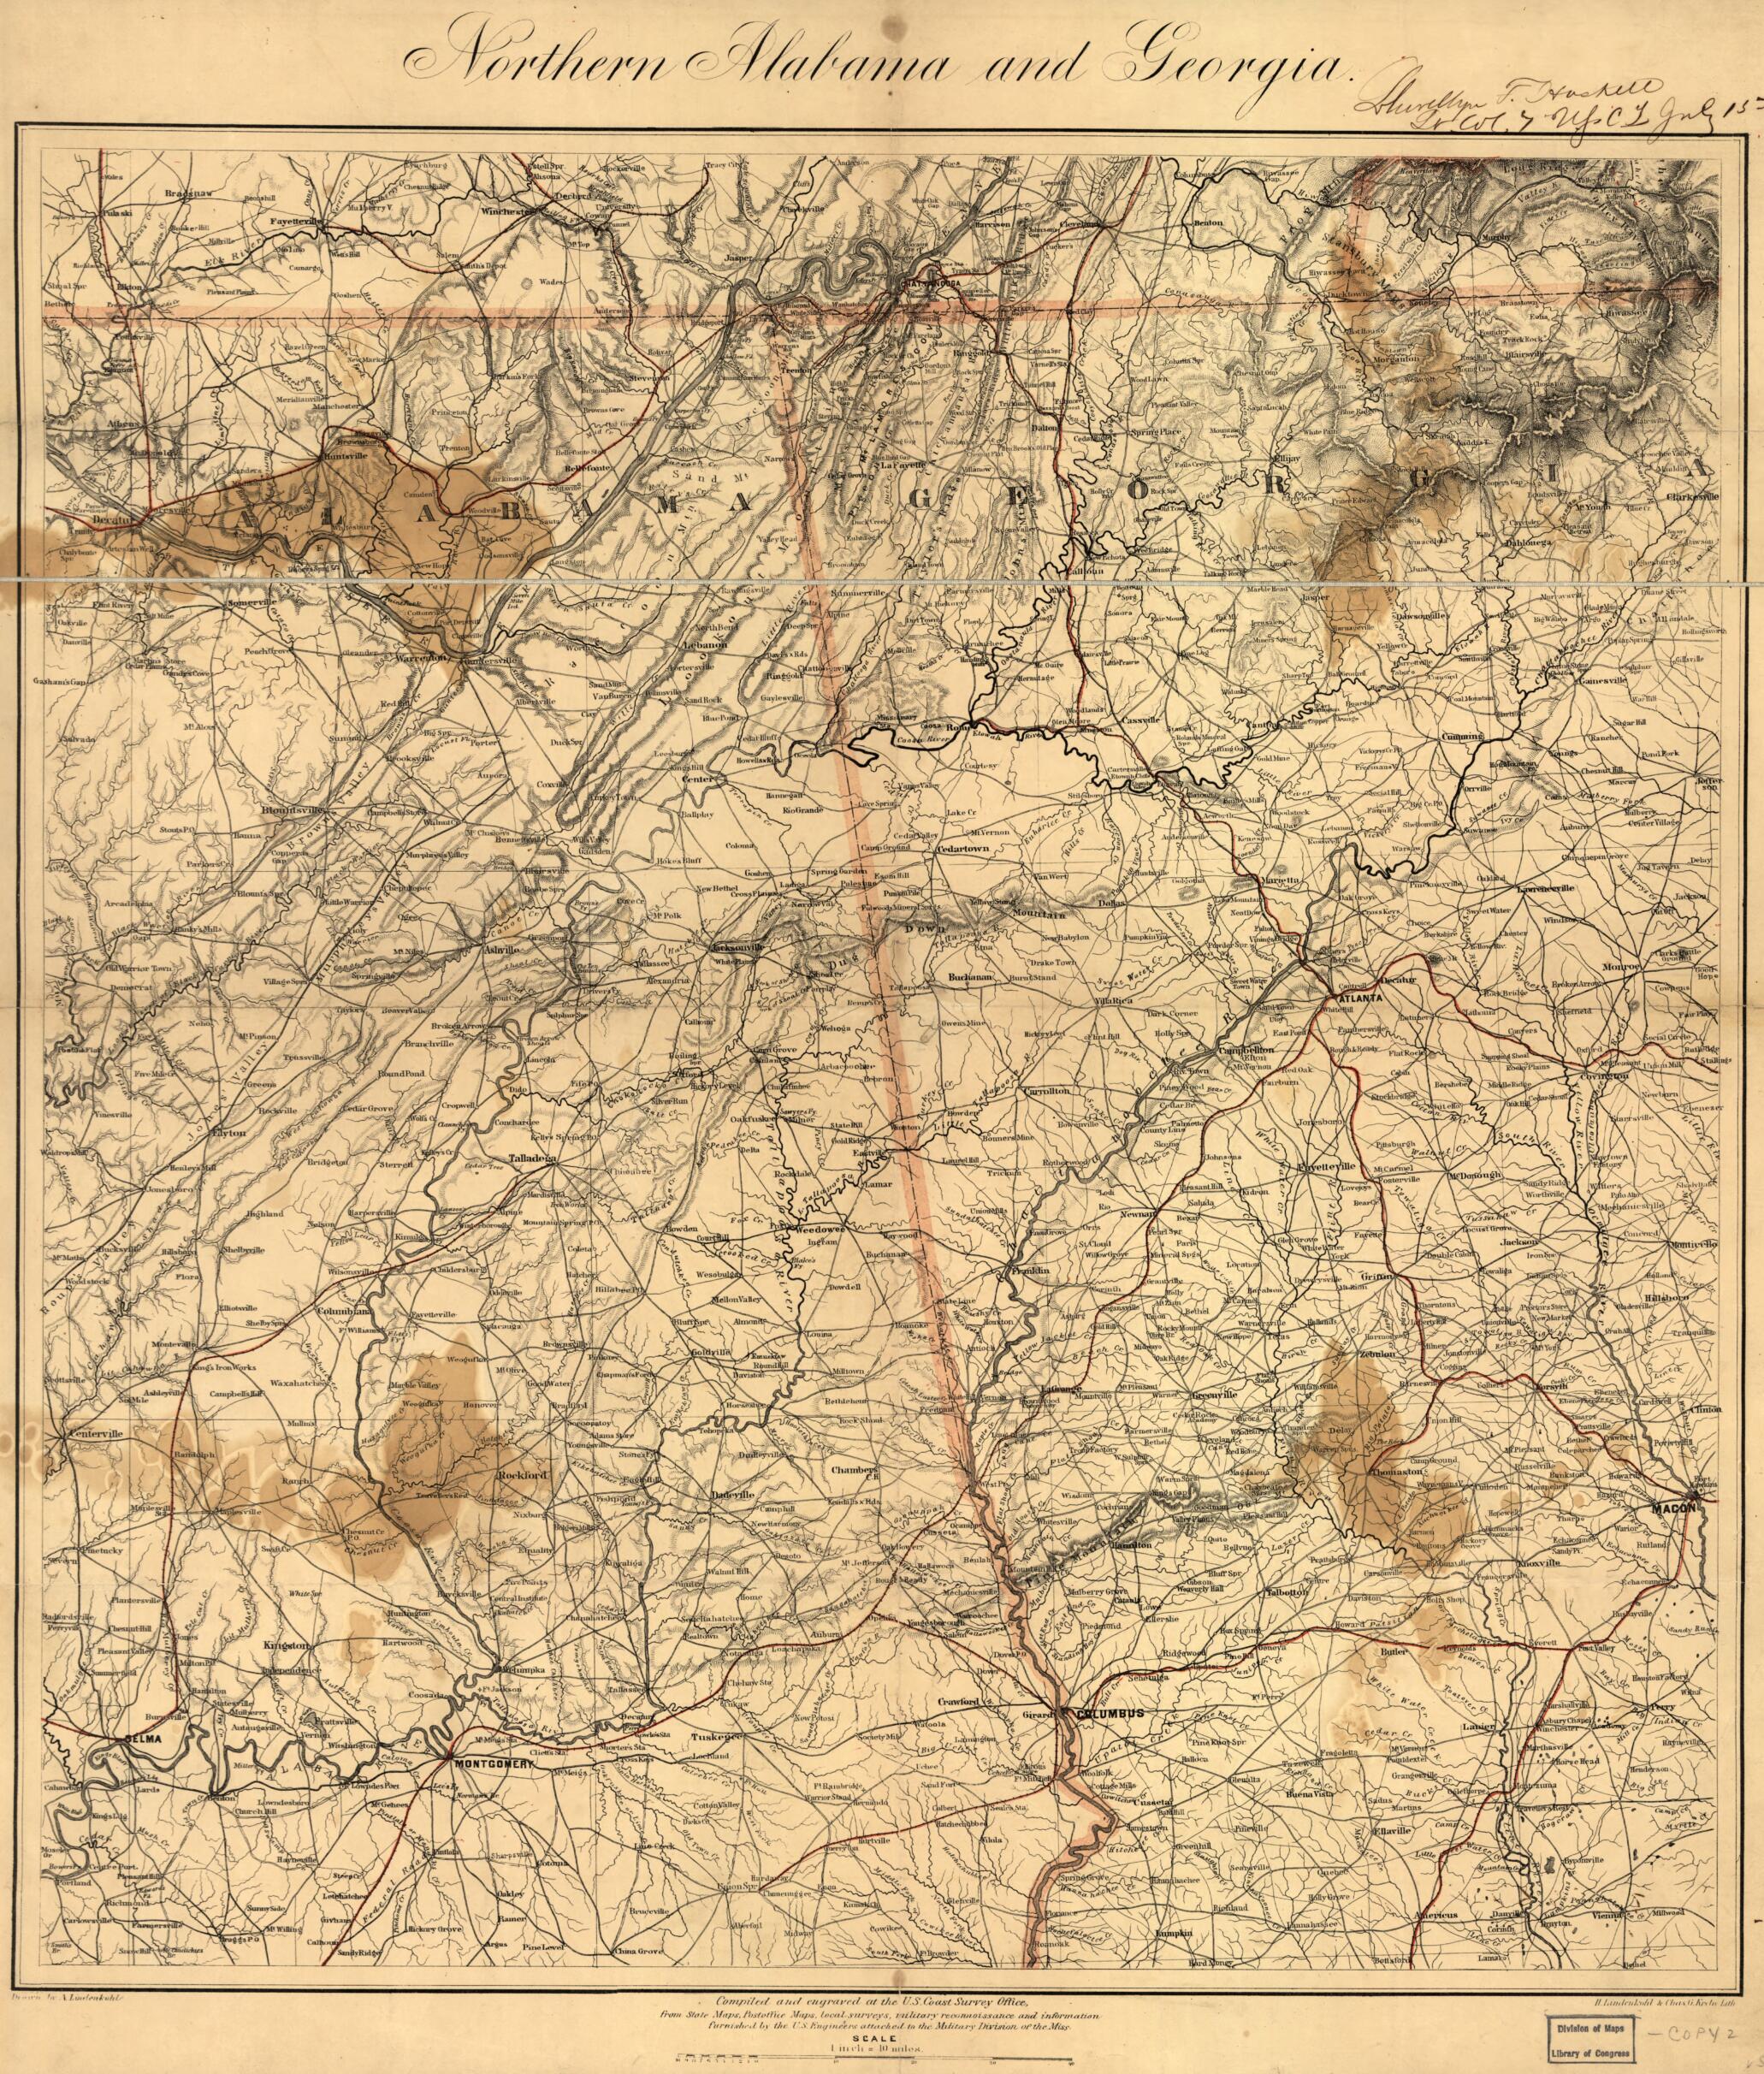 This old map of Northern Alabama and Georgia (Map of Alabama &amp; Georgia) from 1864 was created by Charles G. Krebs, A. Lindenkohl, H. (Henry) Lindenkohl,  United States Coast Survey in 1864